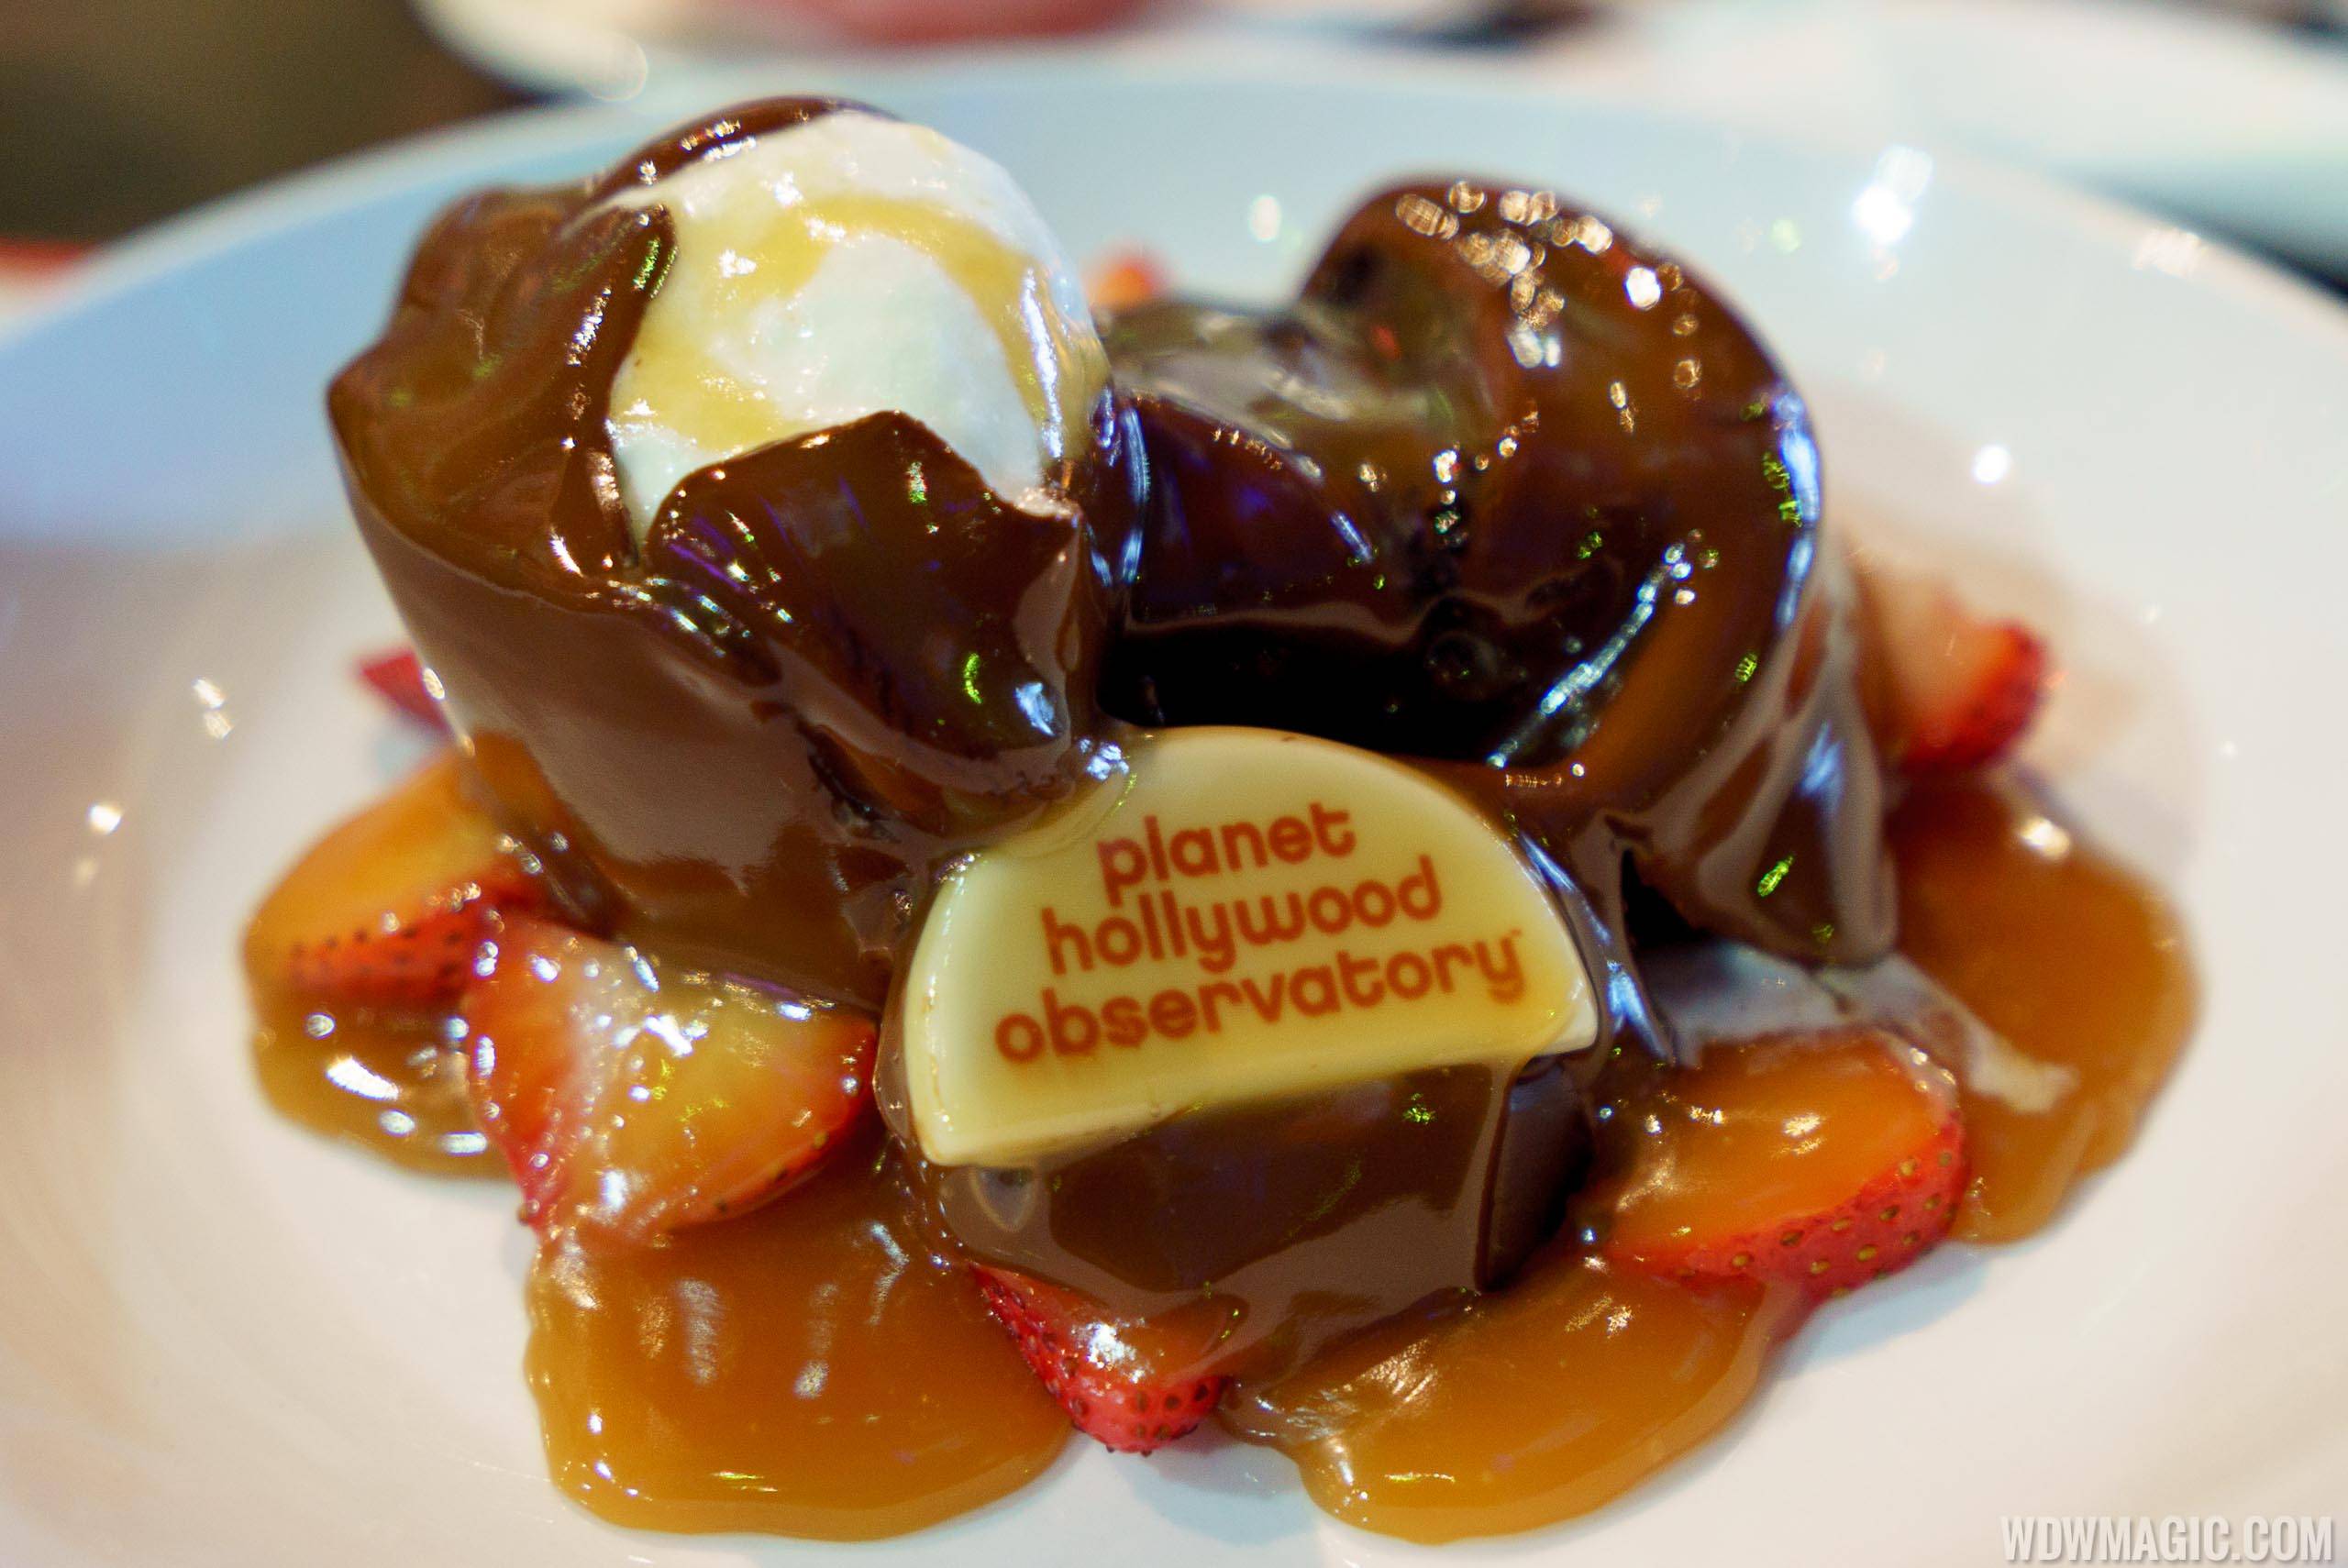 Planet Meltdown - $14.99 Chocolate sphere melted tableside by hot chocolate sauce to reveal double chocolate fudge cake, fresh strawberries and whipped cream 